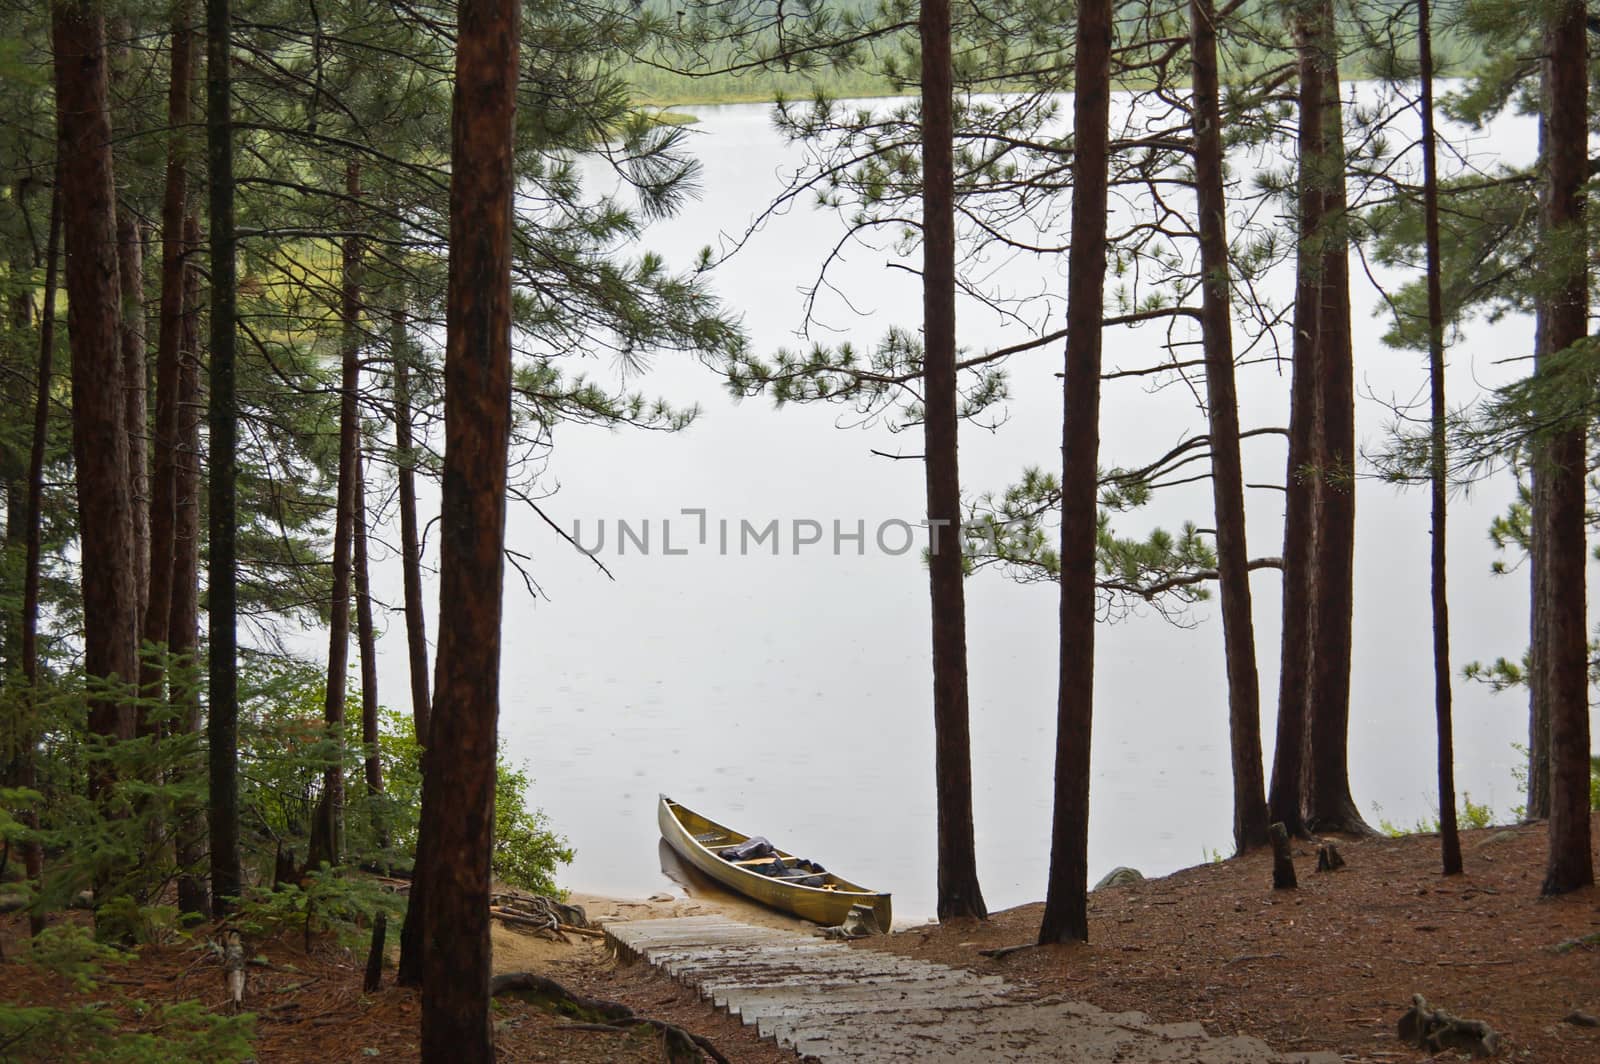 Lake and canoe before portage in rainy day in Algonquin Park